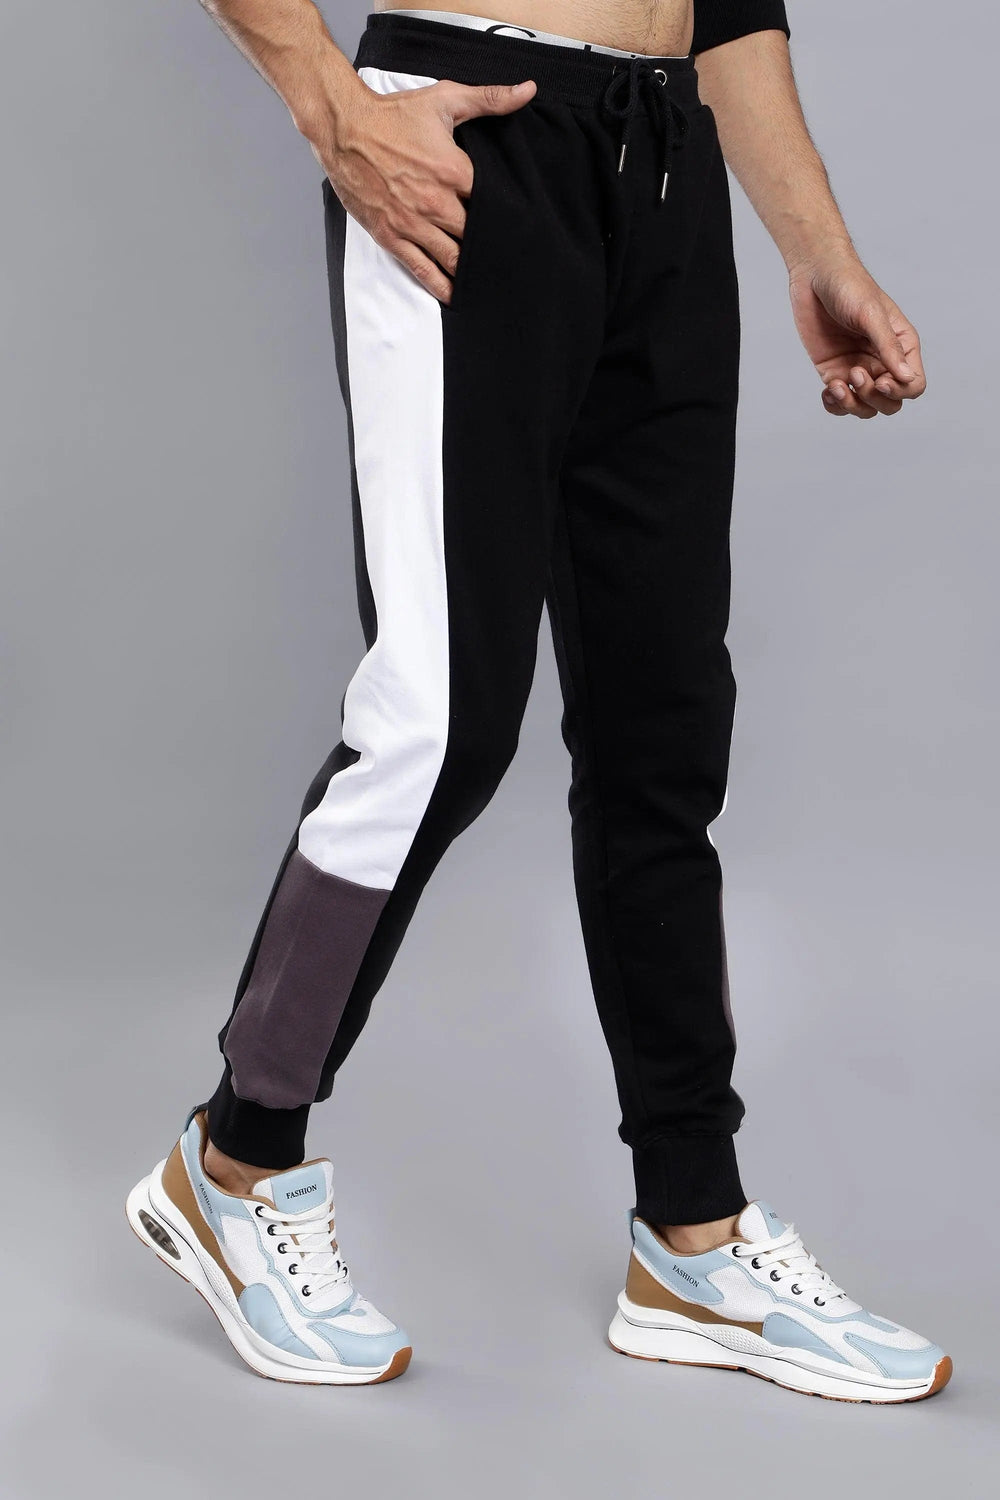 Plaid Ankle Length Mens Xersion Sweatpants 2017 Spring Collection